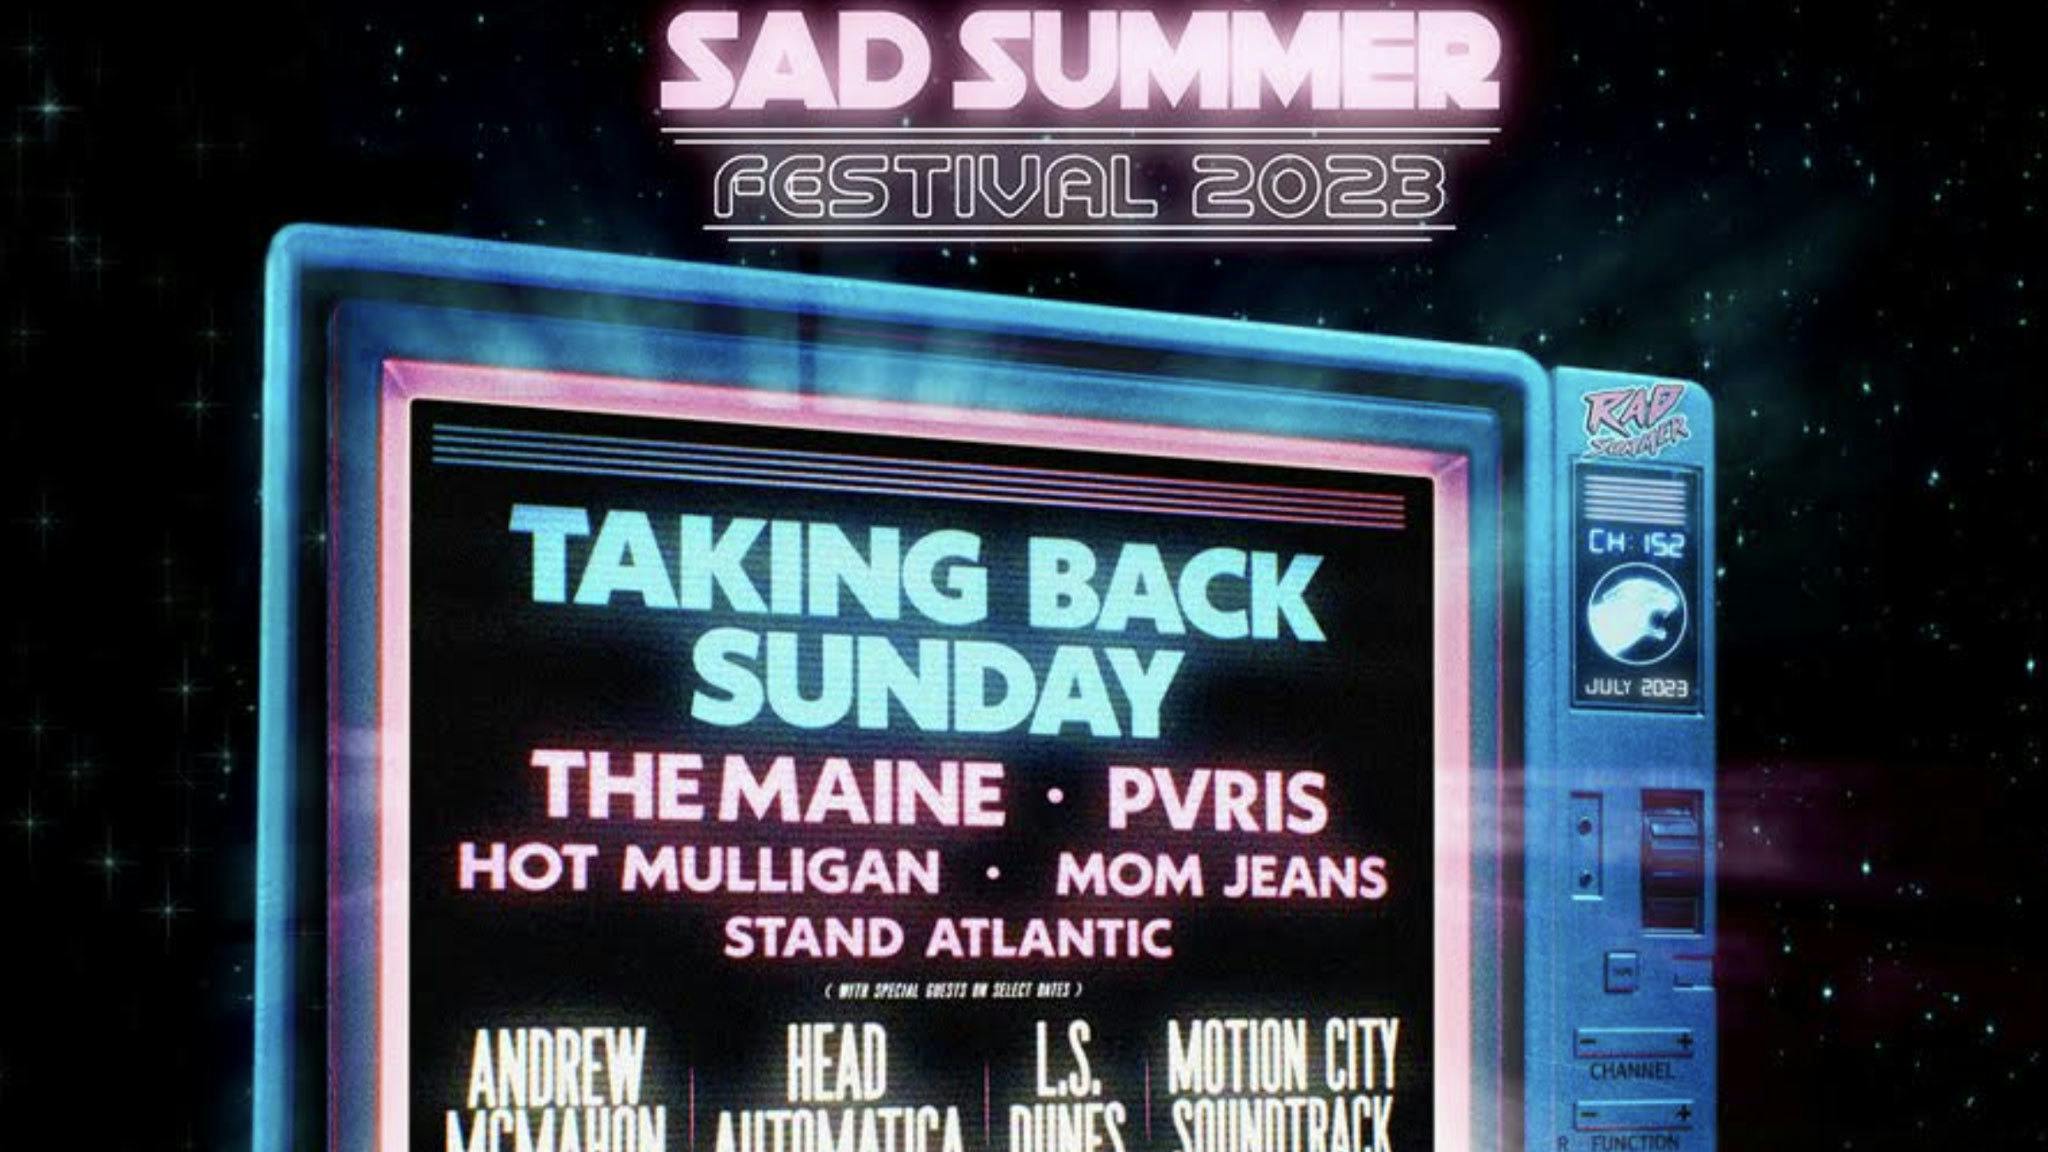 Sad Summer Festival returns with Taking Back Sunday, The Maine, PVRIS and more